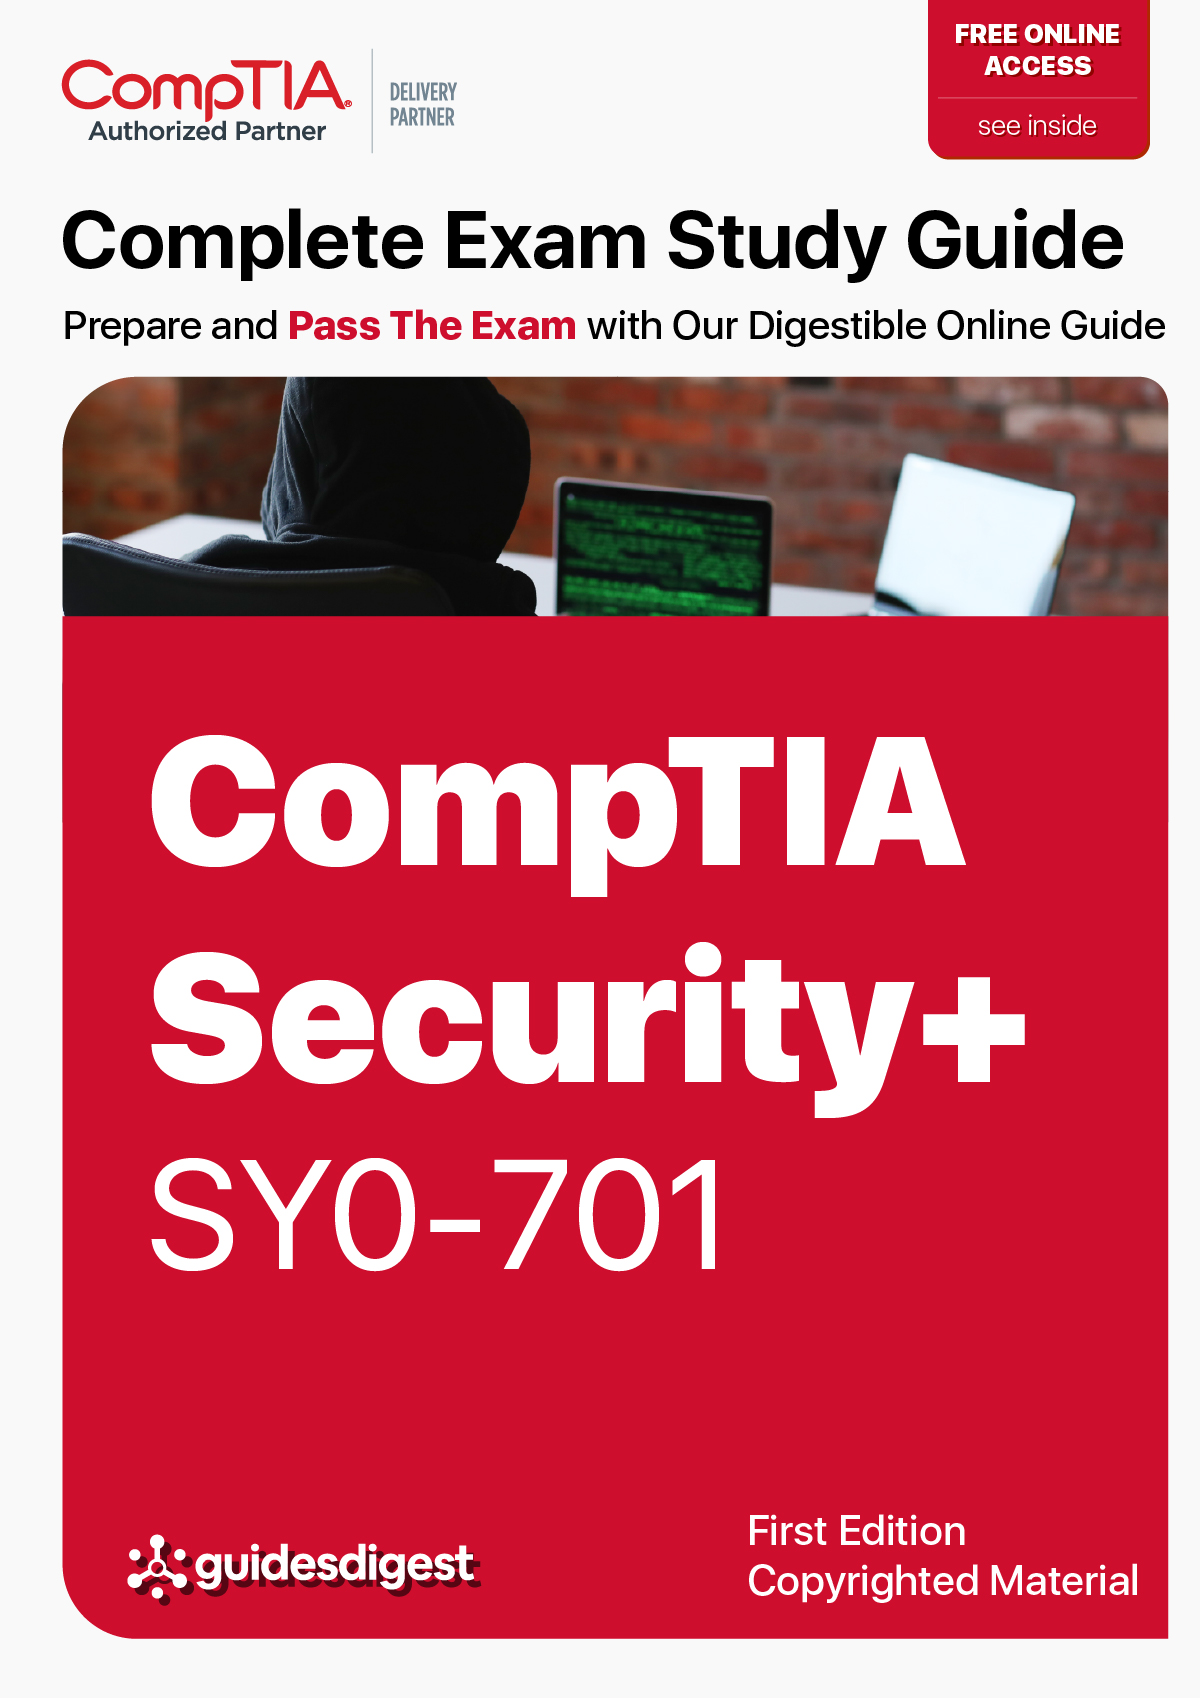 CompTIA Security+ SY0-701 Study Guides, Practice Exam Questions and PBQs